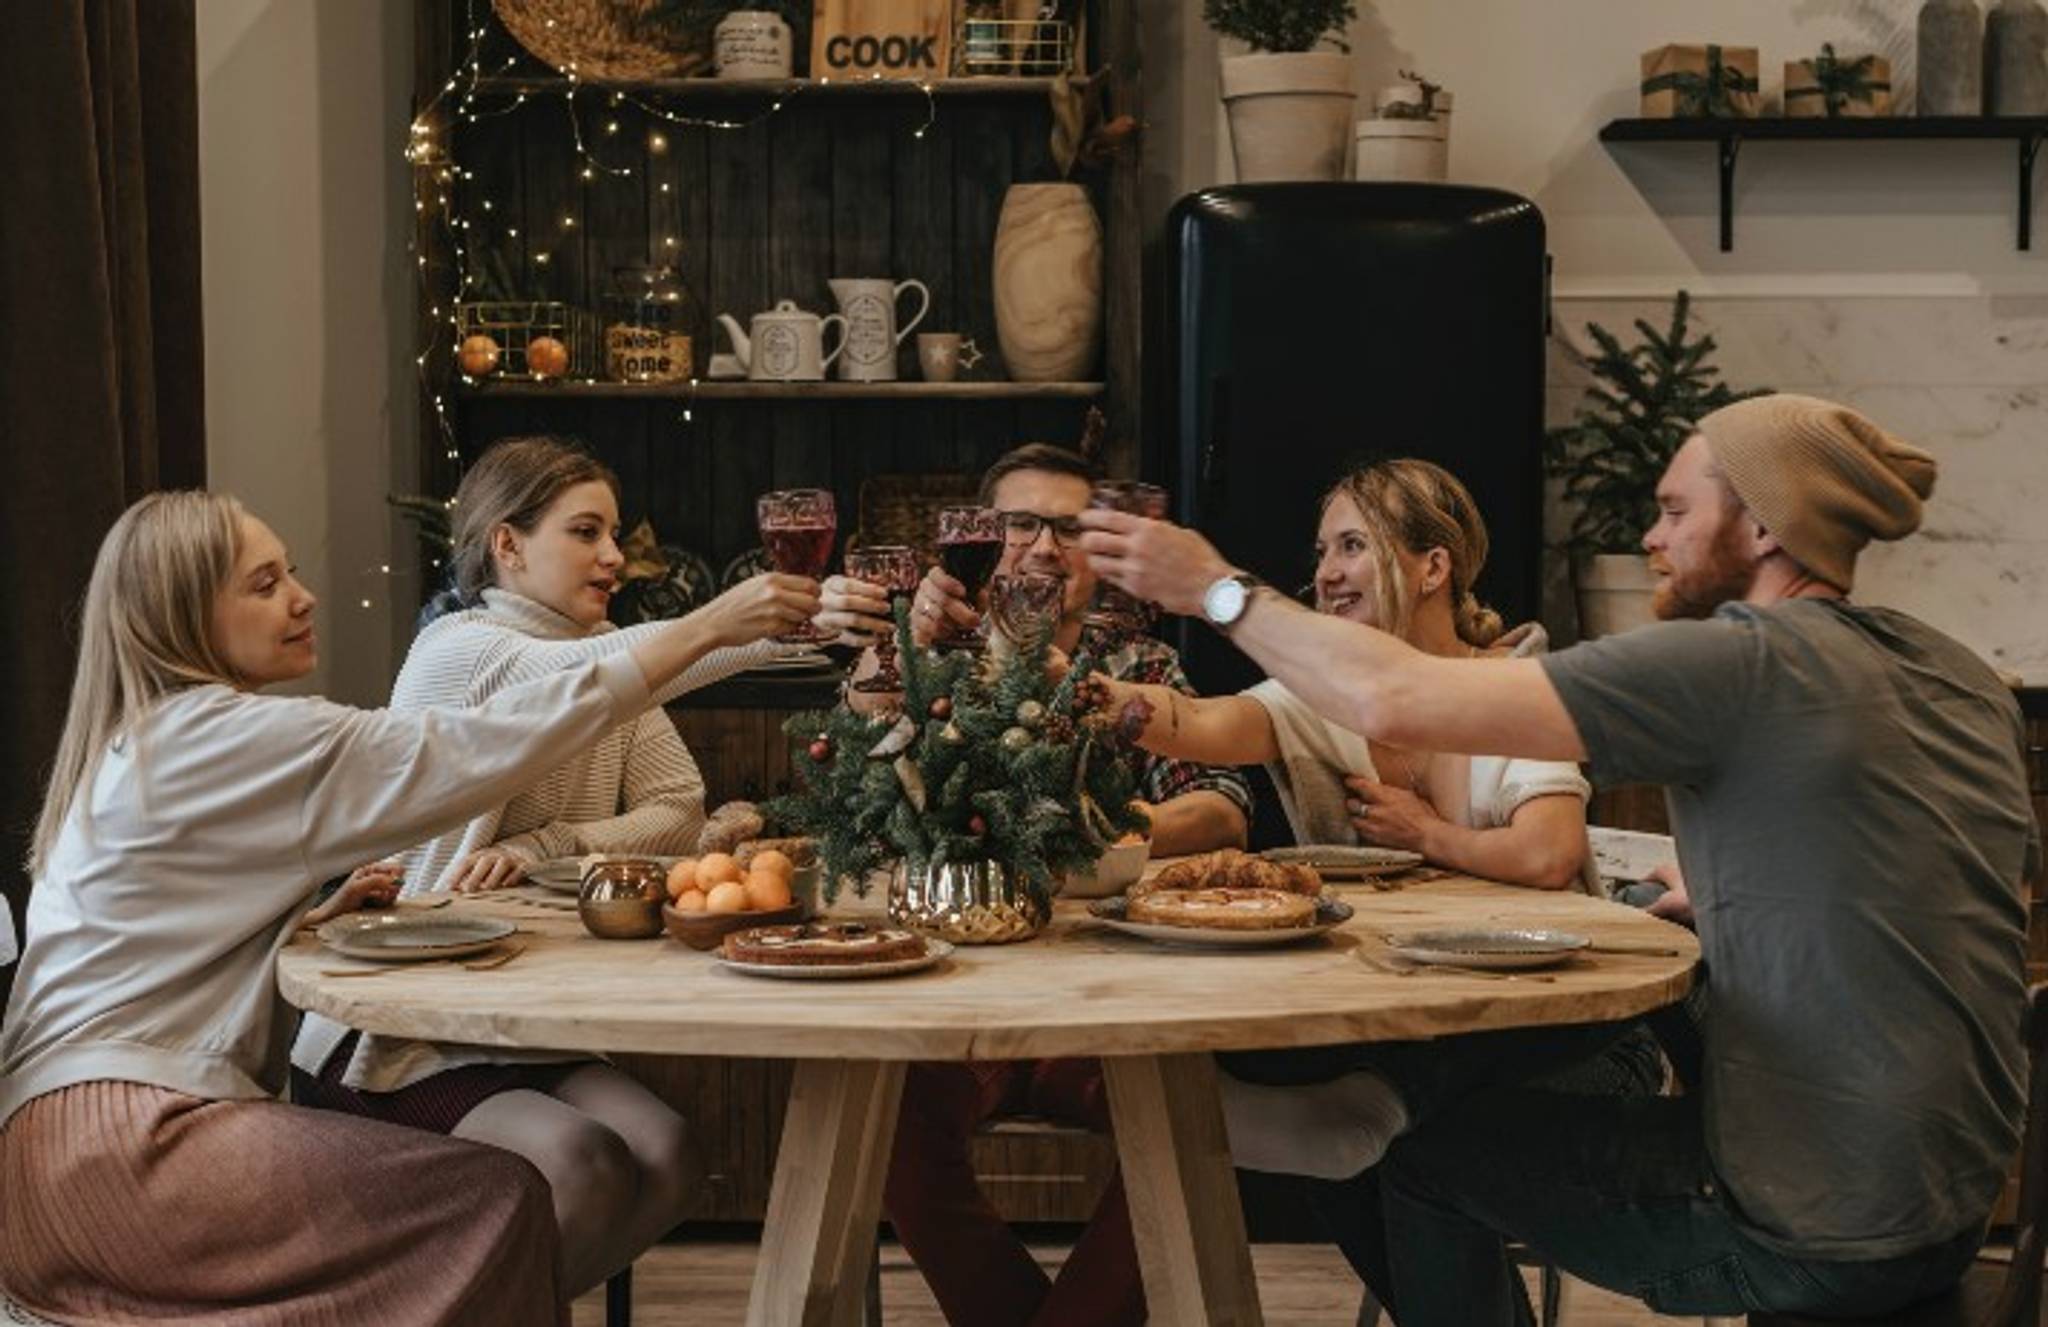 Americans look to food and drink for 2021 holiday joy